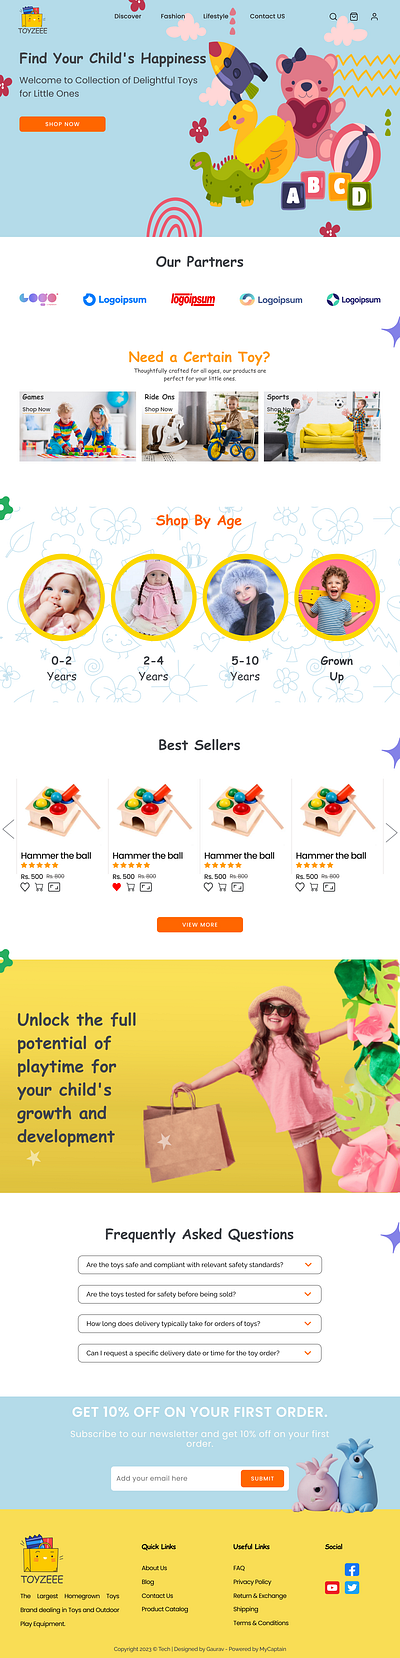 Kids Toy's Shopping Site - TOYZEEE kids shopping site website